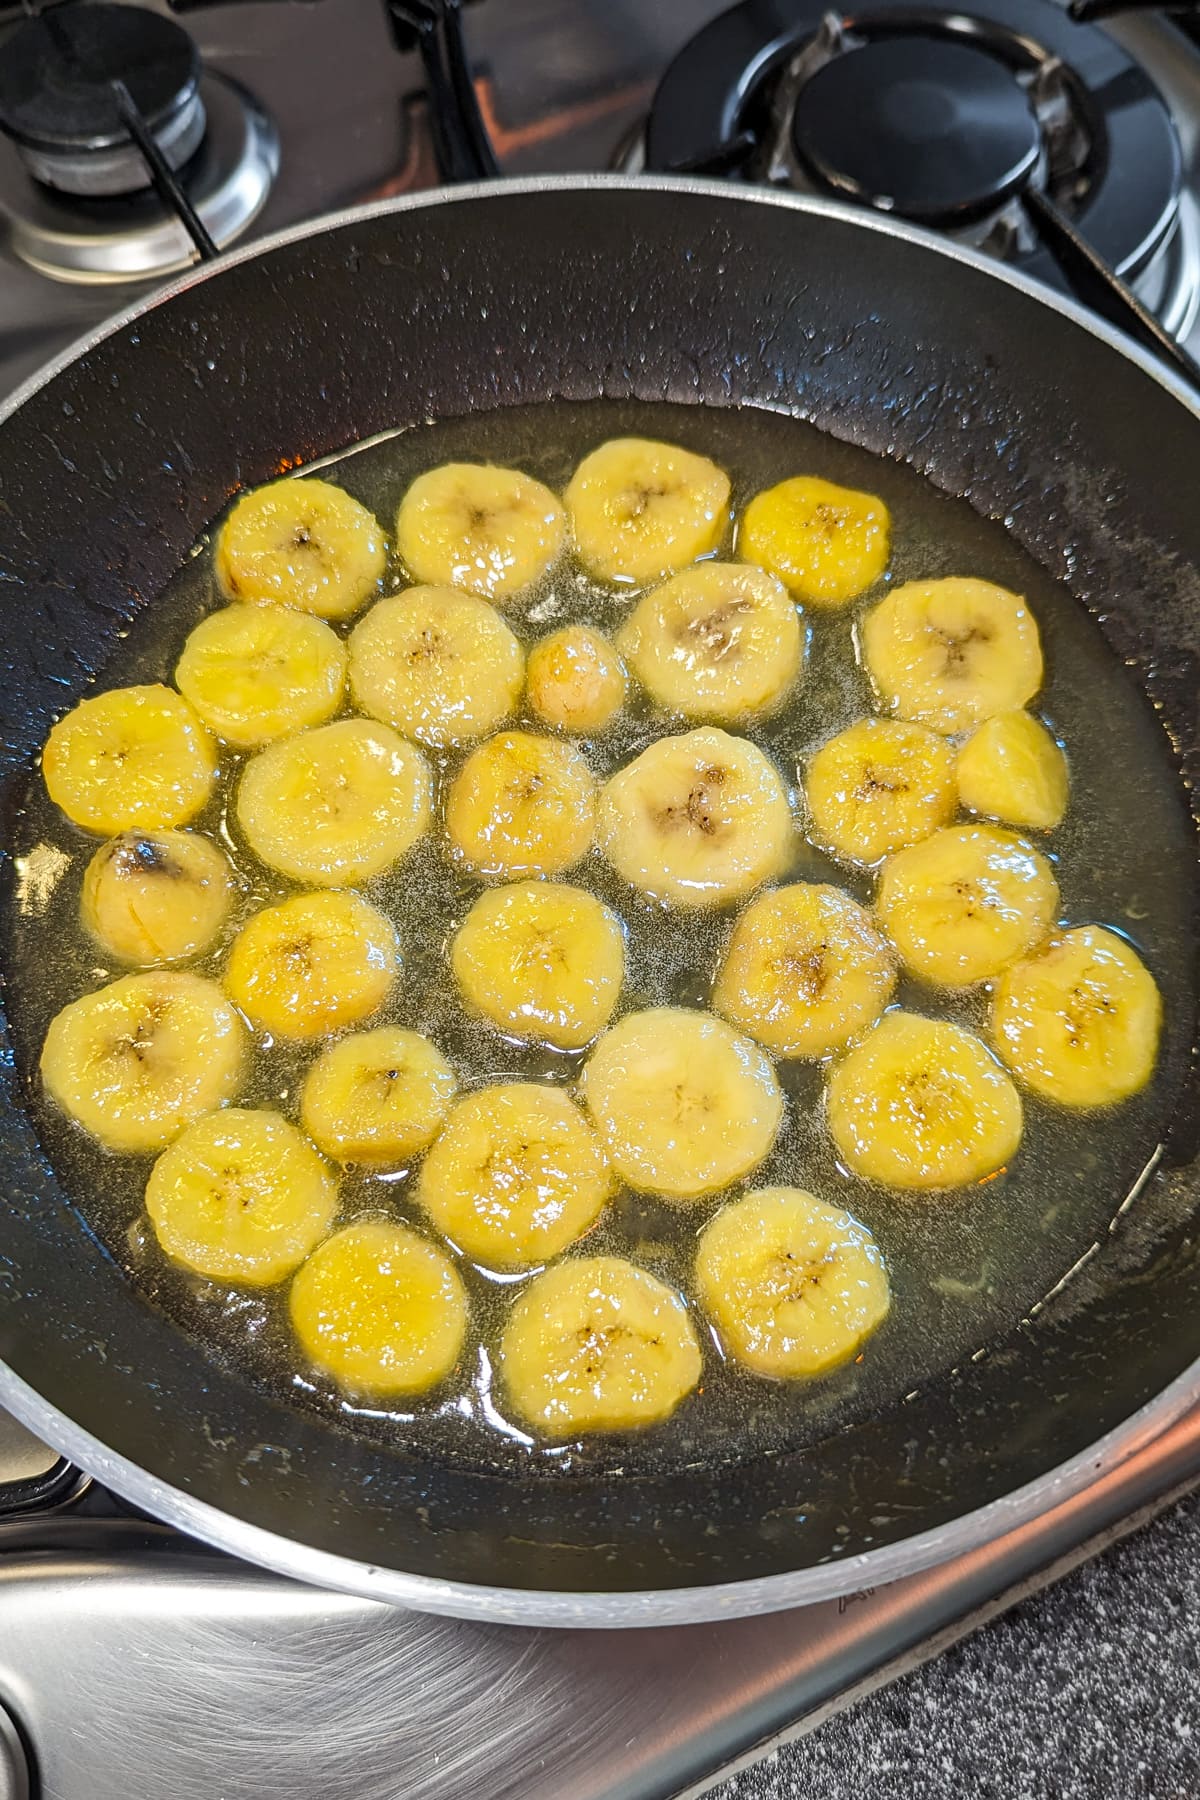 Caramelizing banana slices in a frying pan with melted sugar.